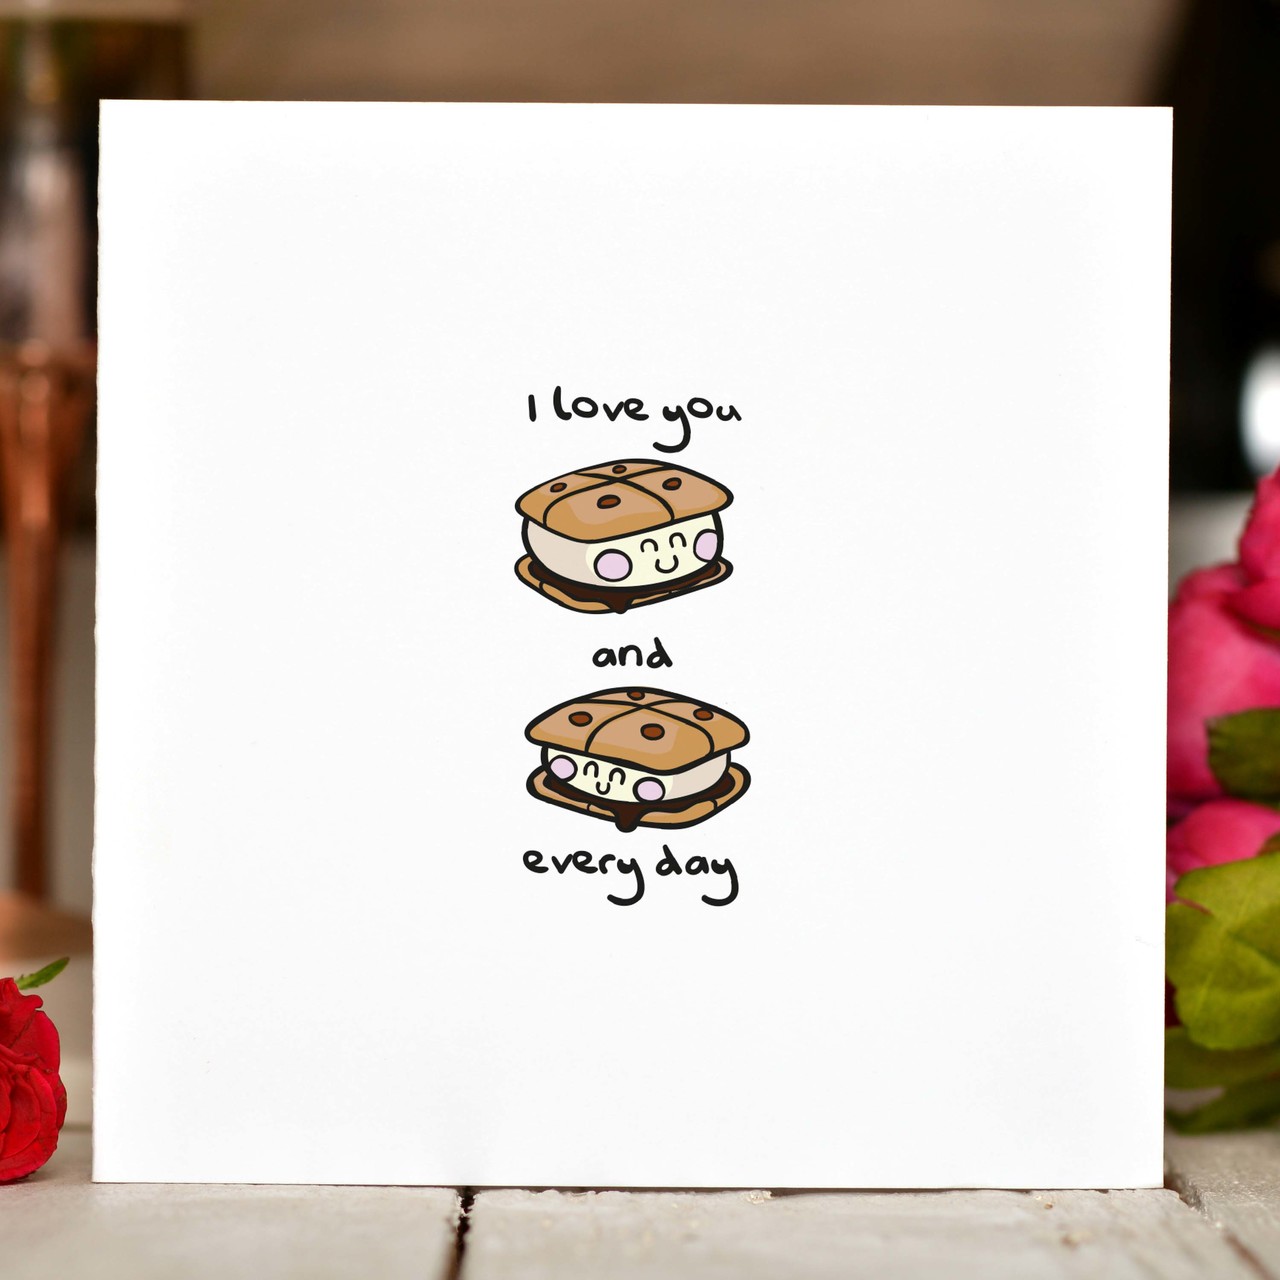 I love you s’more and s’more every day Card